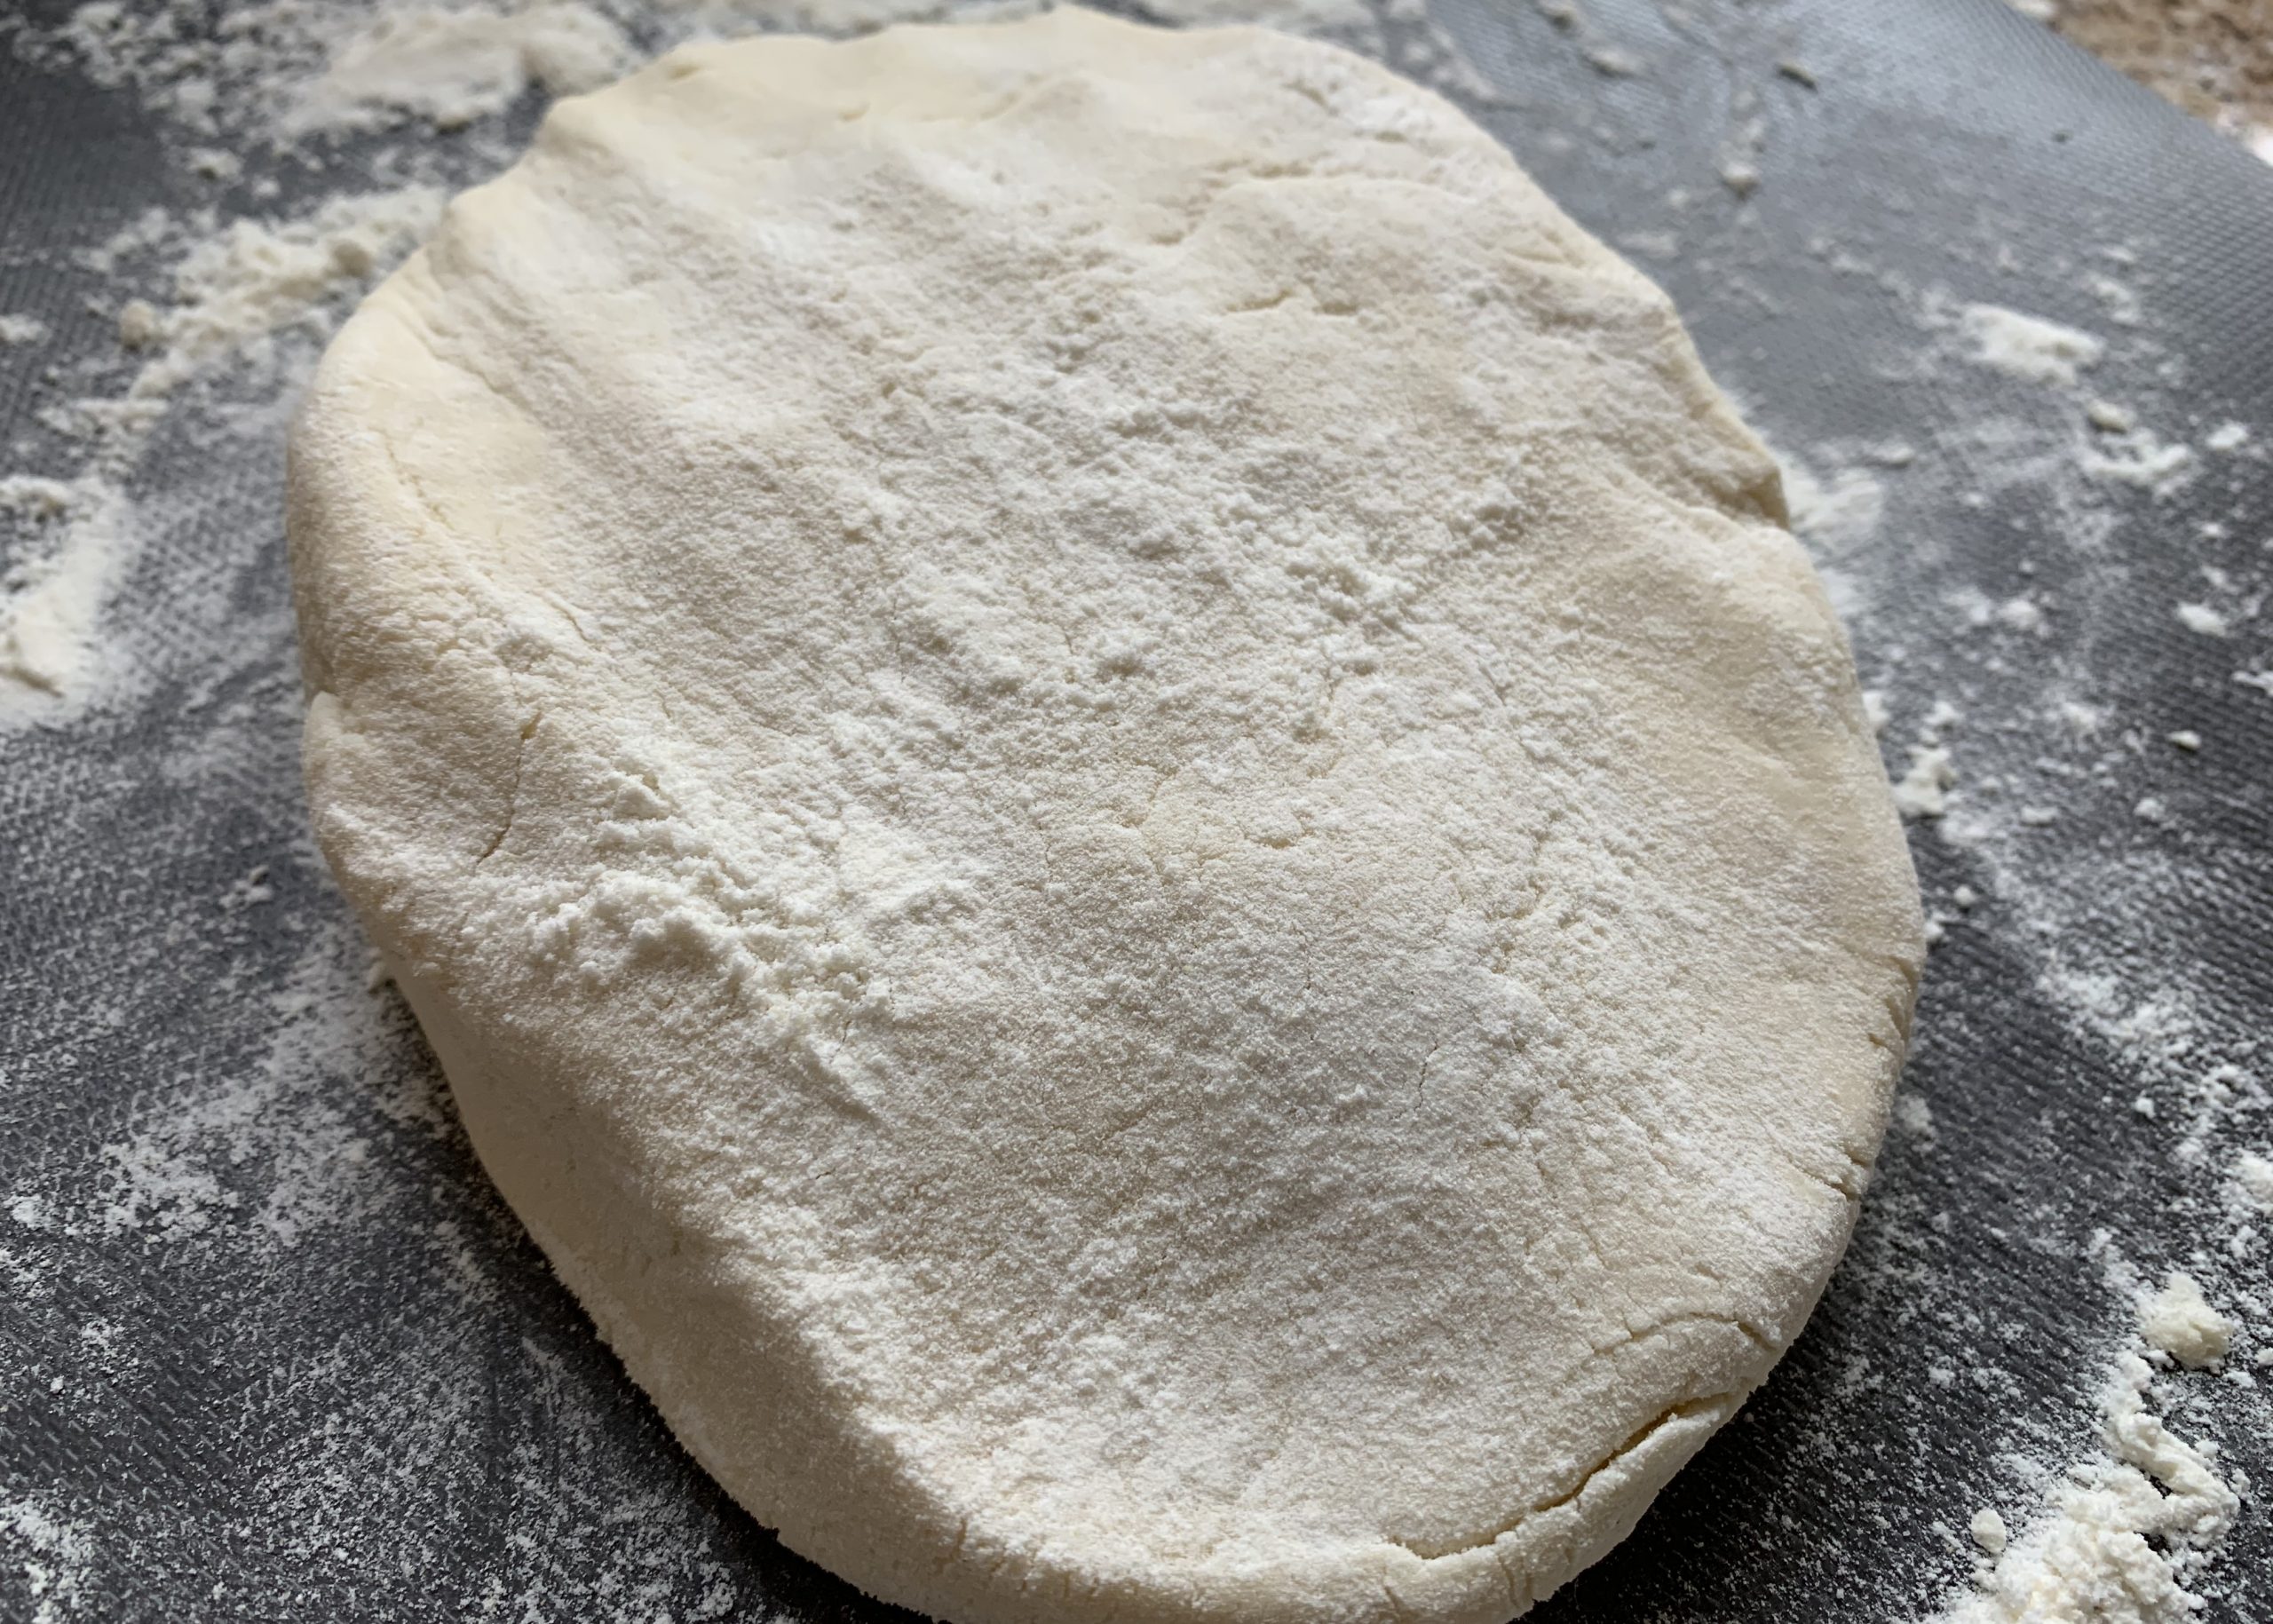 Gluten free pizza base dough on a surface dusted with gluten free flour 